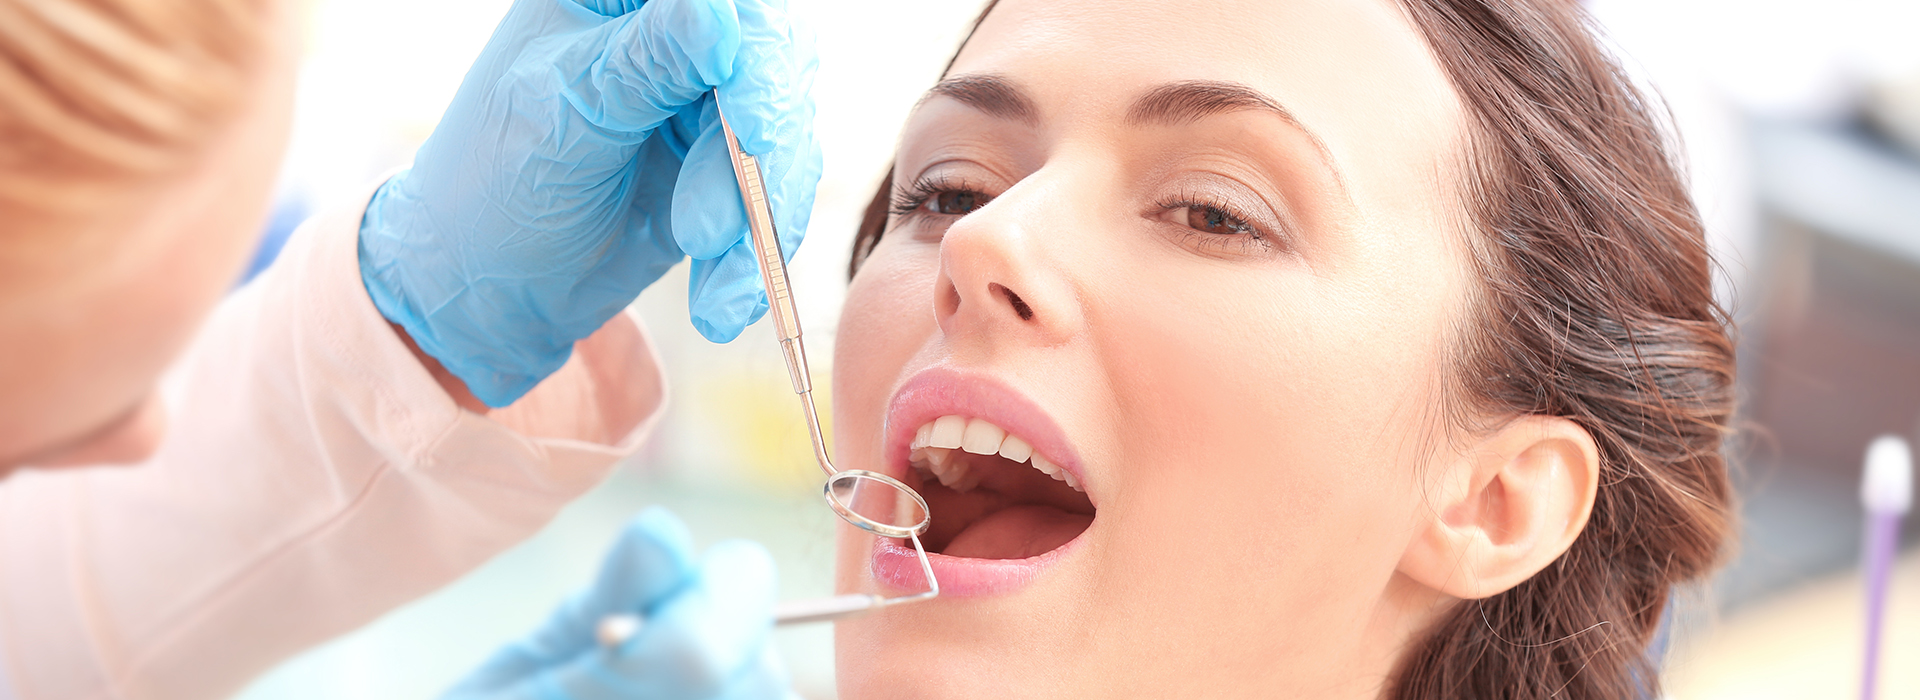 Hanhan Dental | Snoring Appliances, Periodontal Treatment and Ceramic Crowns